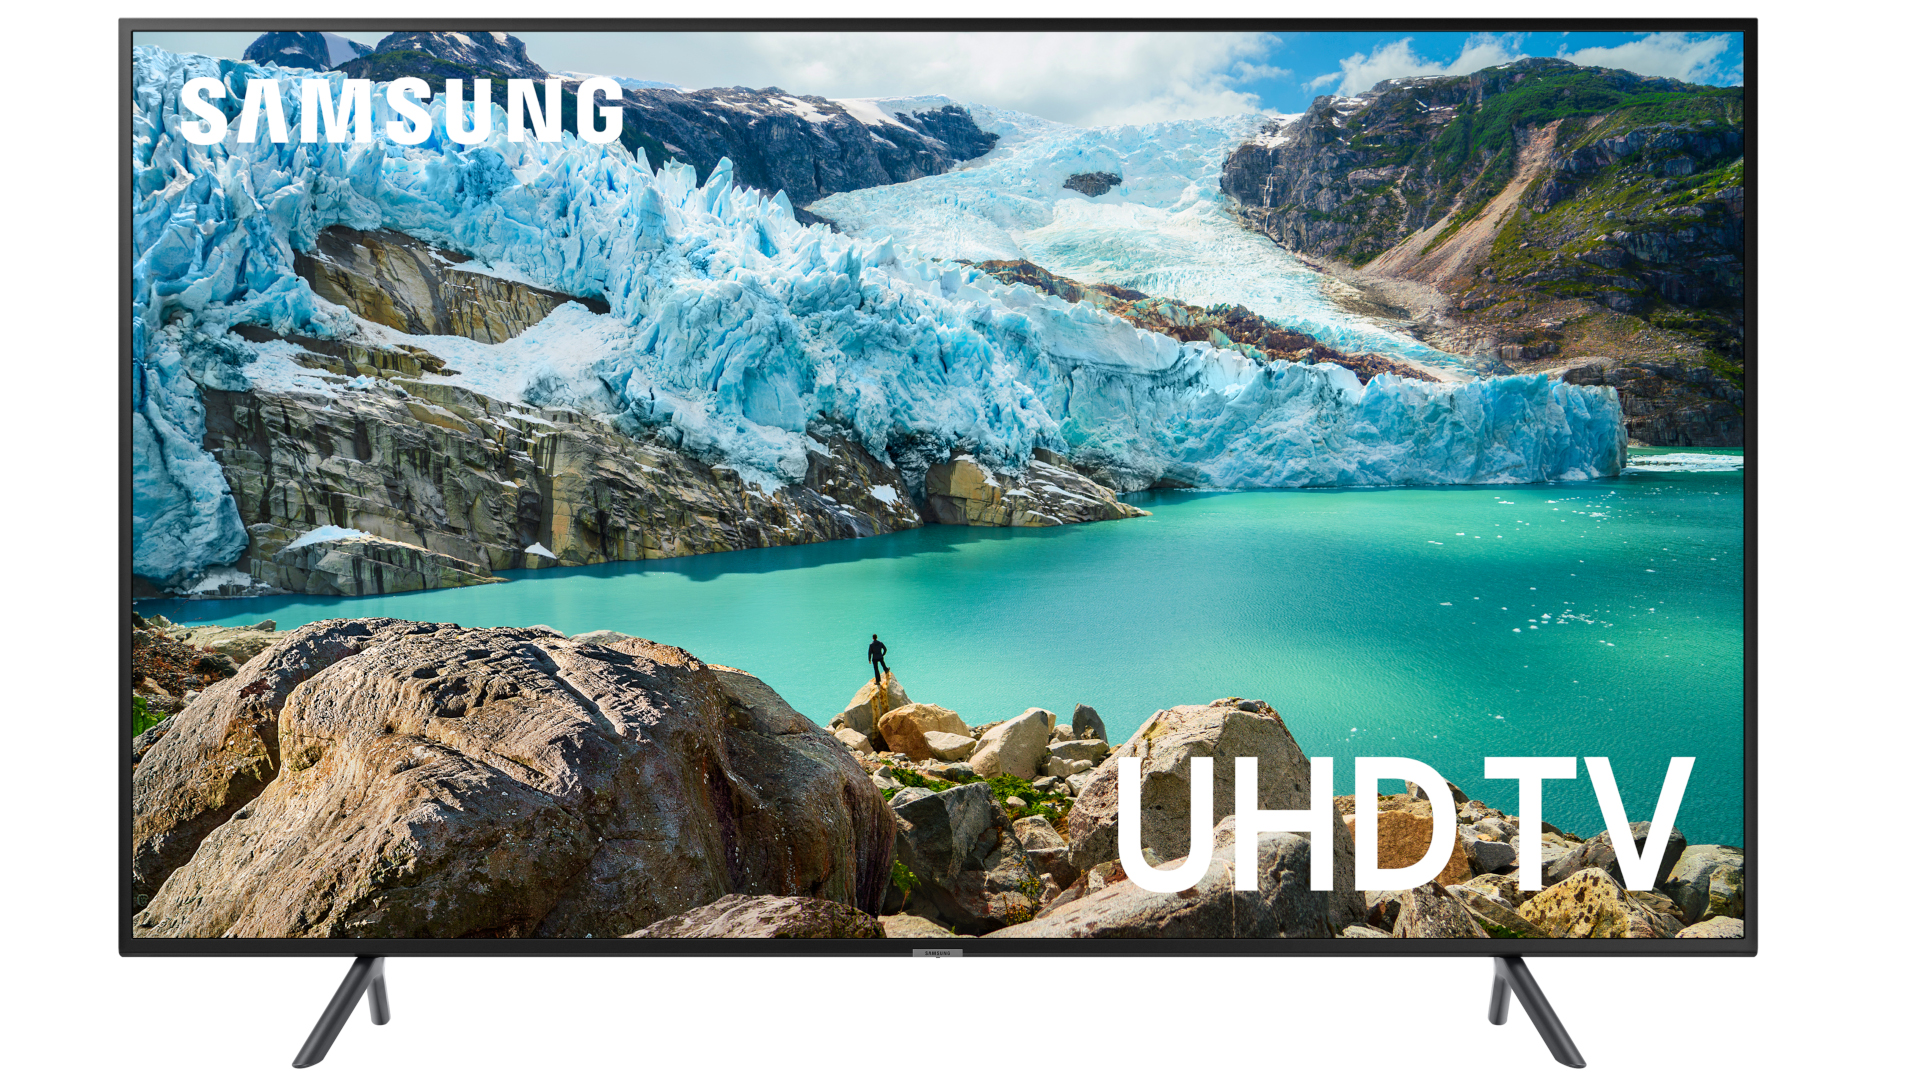 Samsung TV Catalog 2019: Every new Samsung TV coming in 2019 11